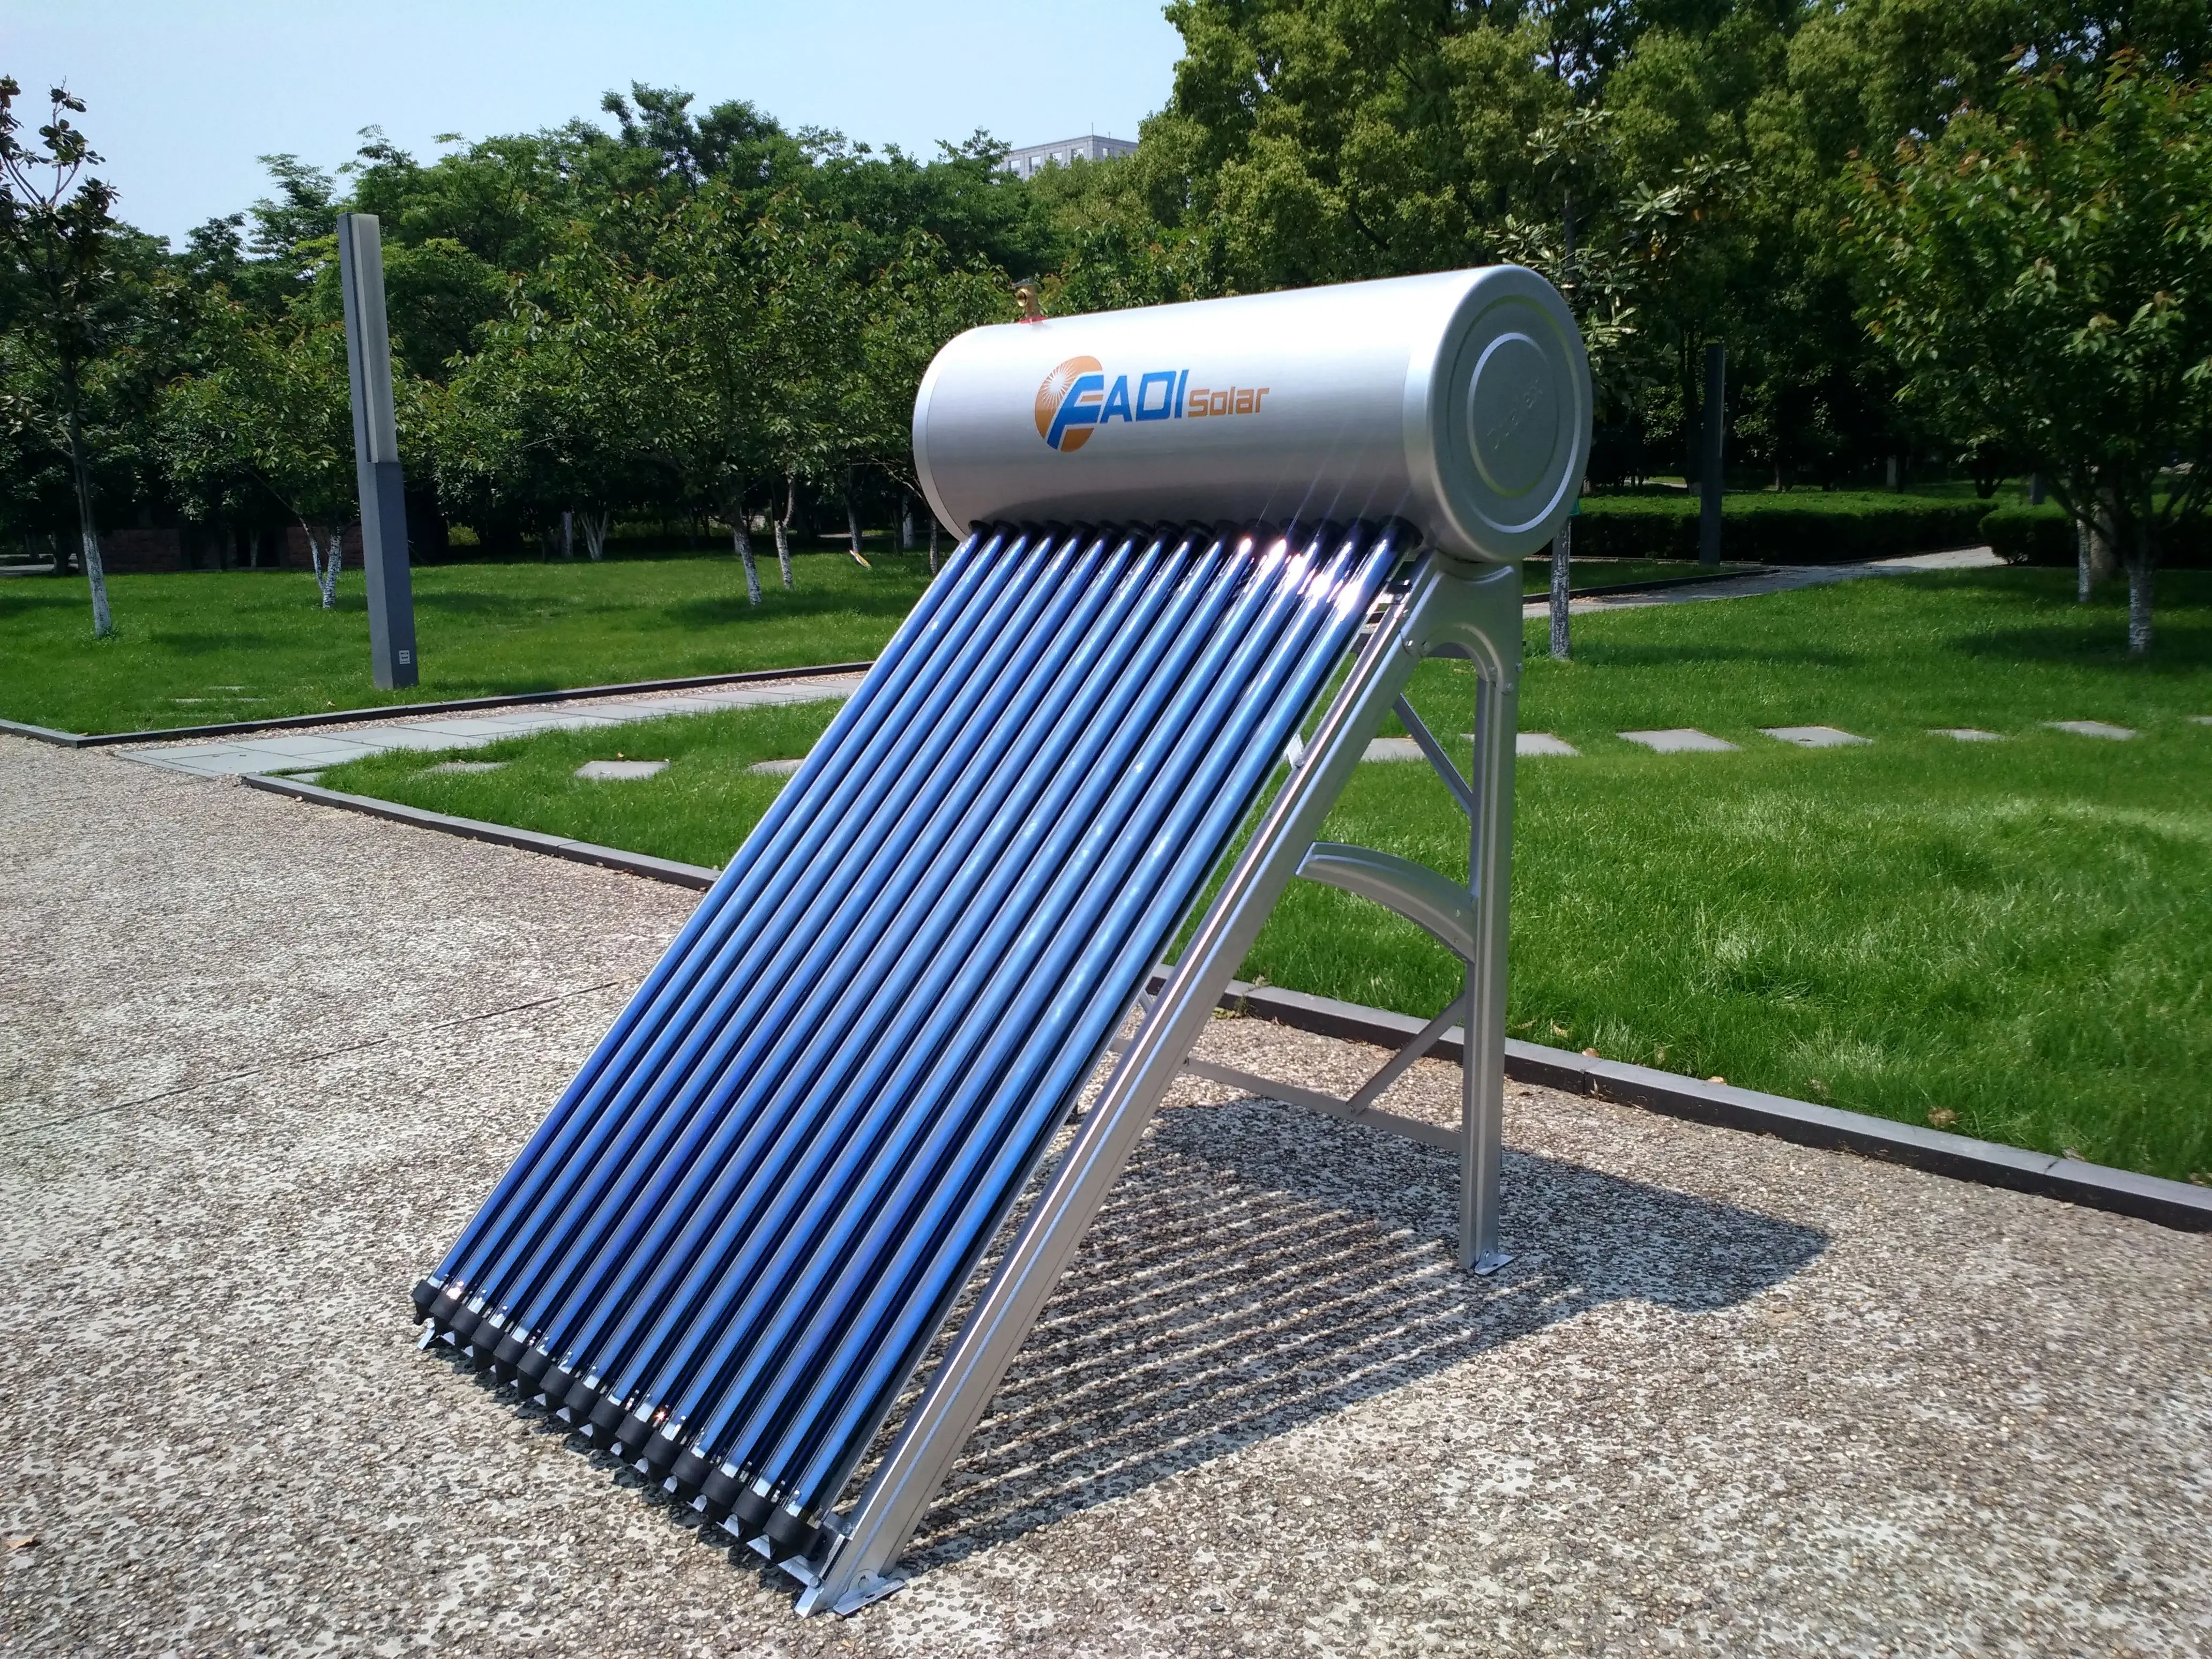 Solar Keymark Solar Water Heaters 150L Integrated Pressurized Solar Water Heater System Stainless Steel With Vacuum Tube